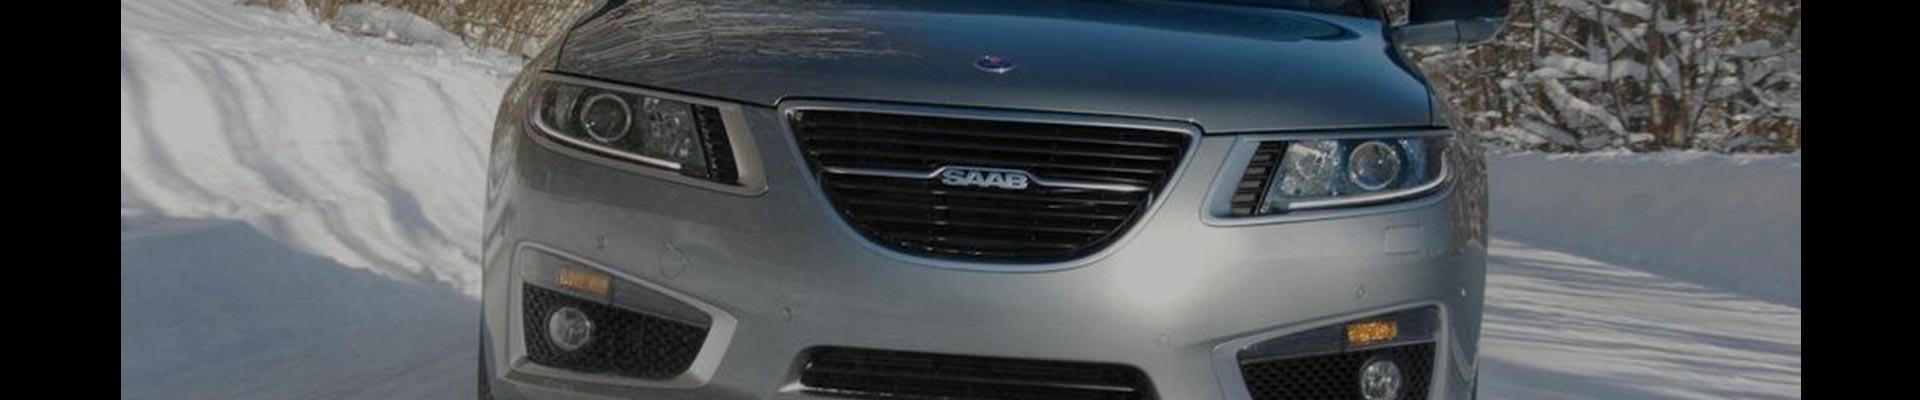 Shop Replacement Saab Parts with Discounted Price on the Net